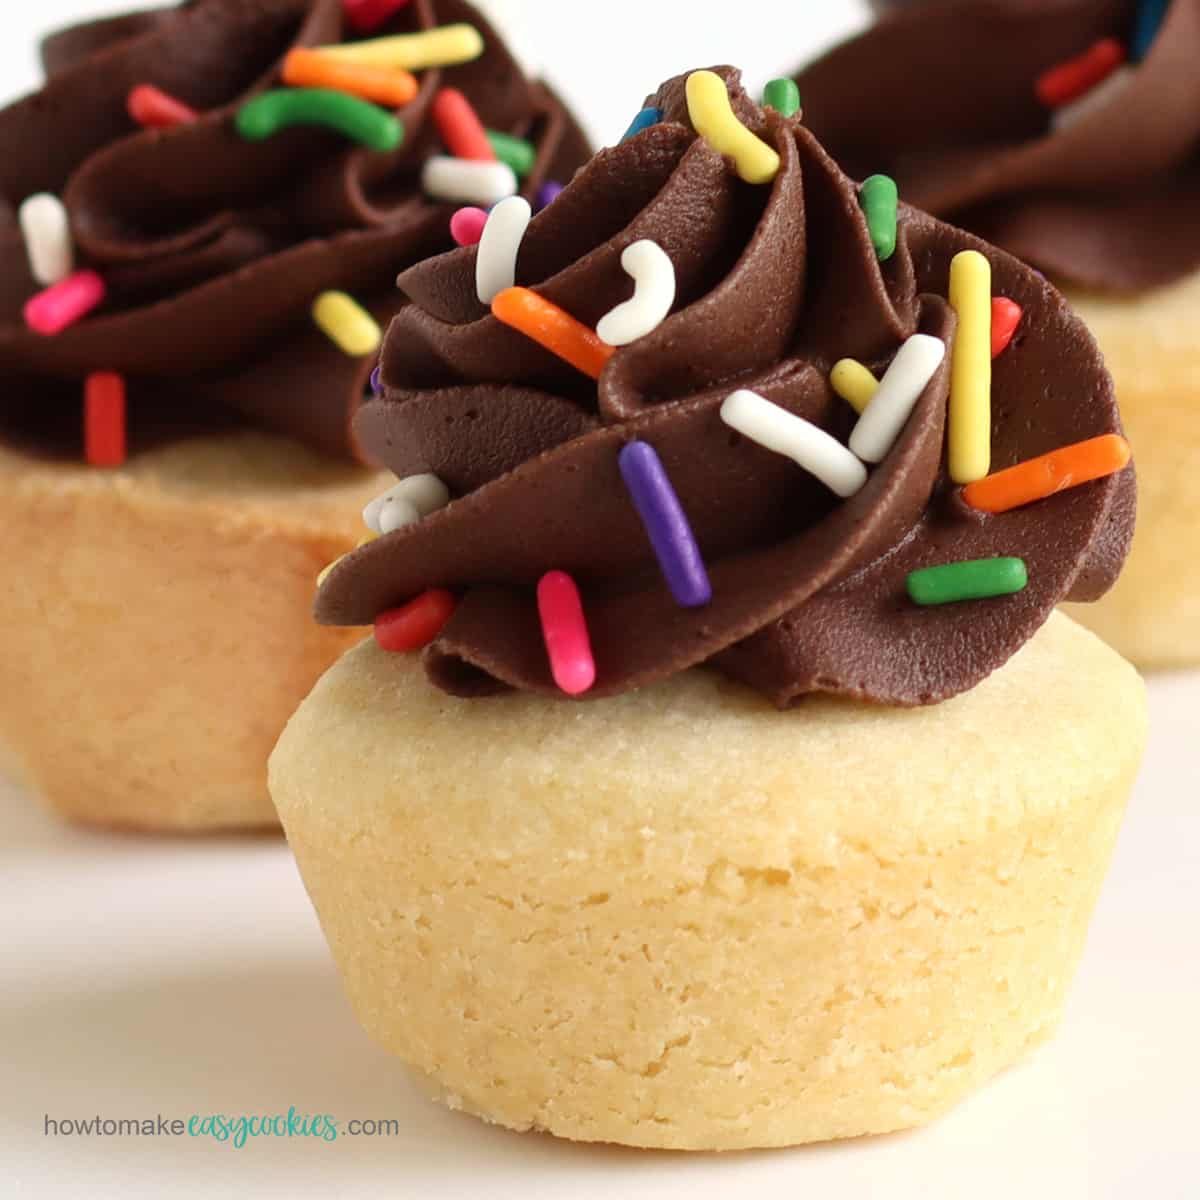 Sugar cookie cups topped with a big swirl of chocolate frosting and rainbow sprinkles.